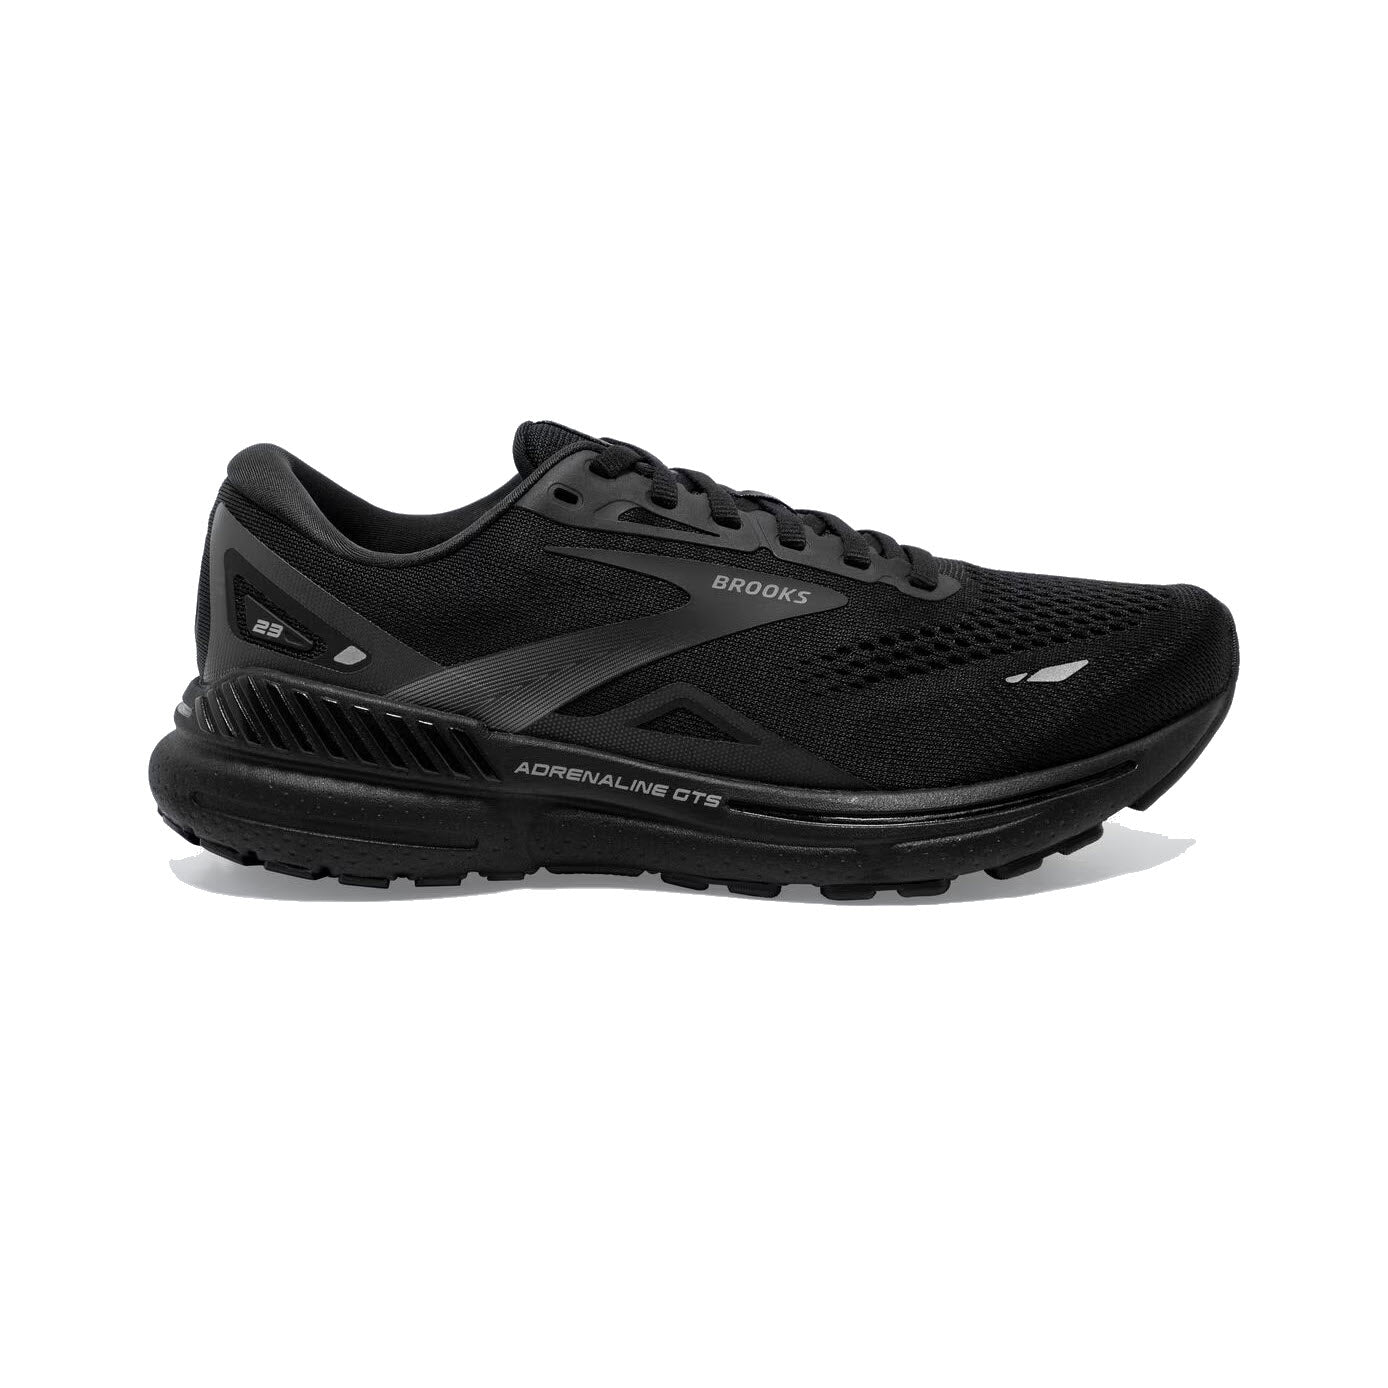 A single black Brooks Adrenaline GTS 23 stability running shoe featuring DNA LOFT v2 cushioning, against a white background.